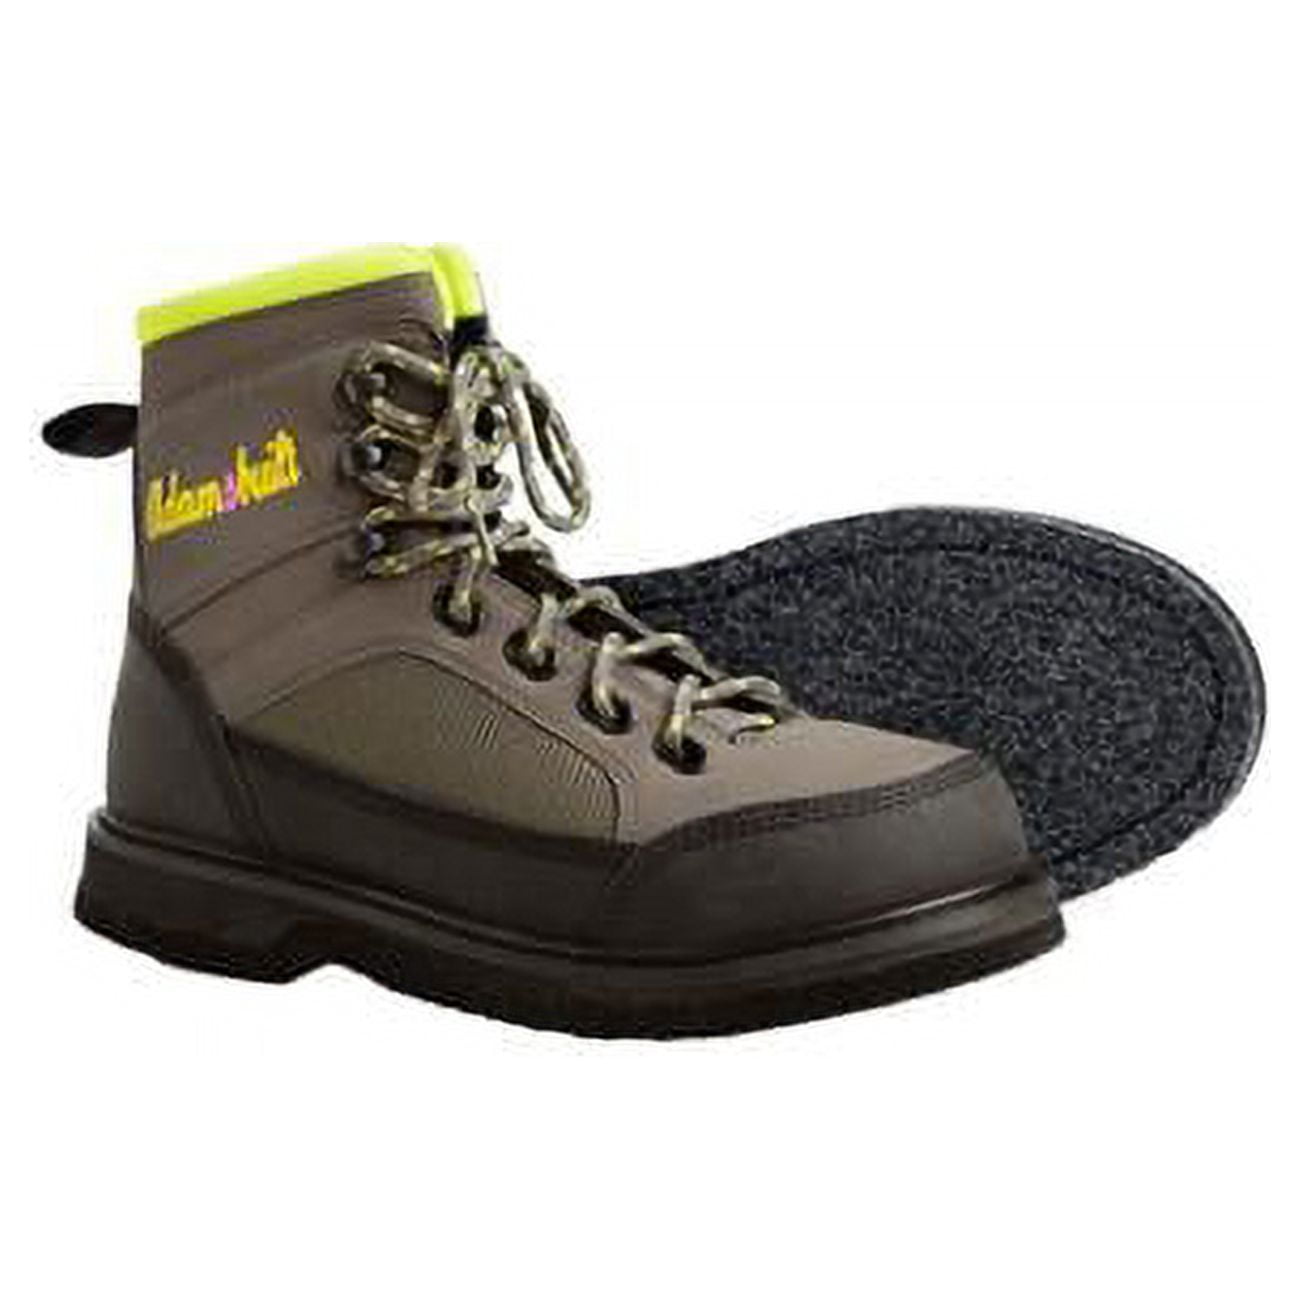 Picture of Adamsbuilt Fishing ABWSRWB-9 Womens Smith River Felt Sole Wading Boot - Size 9